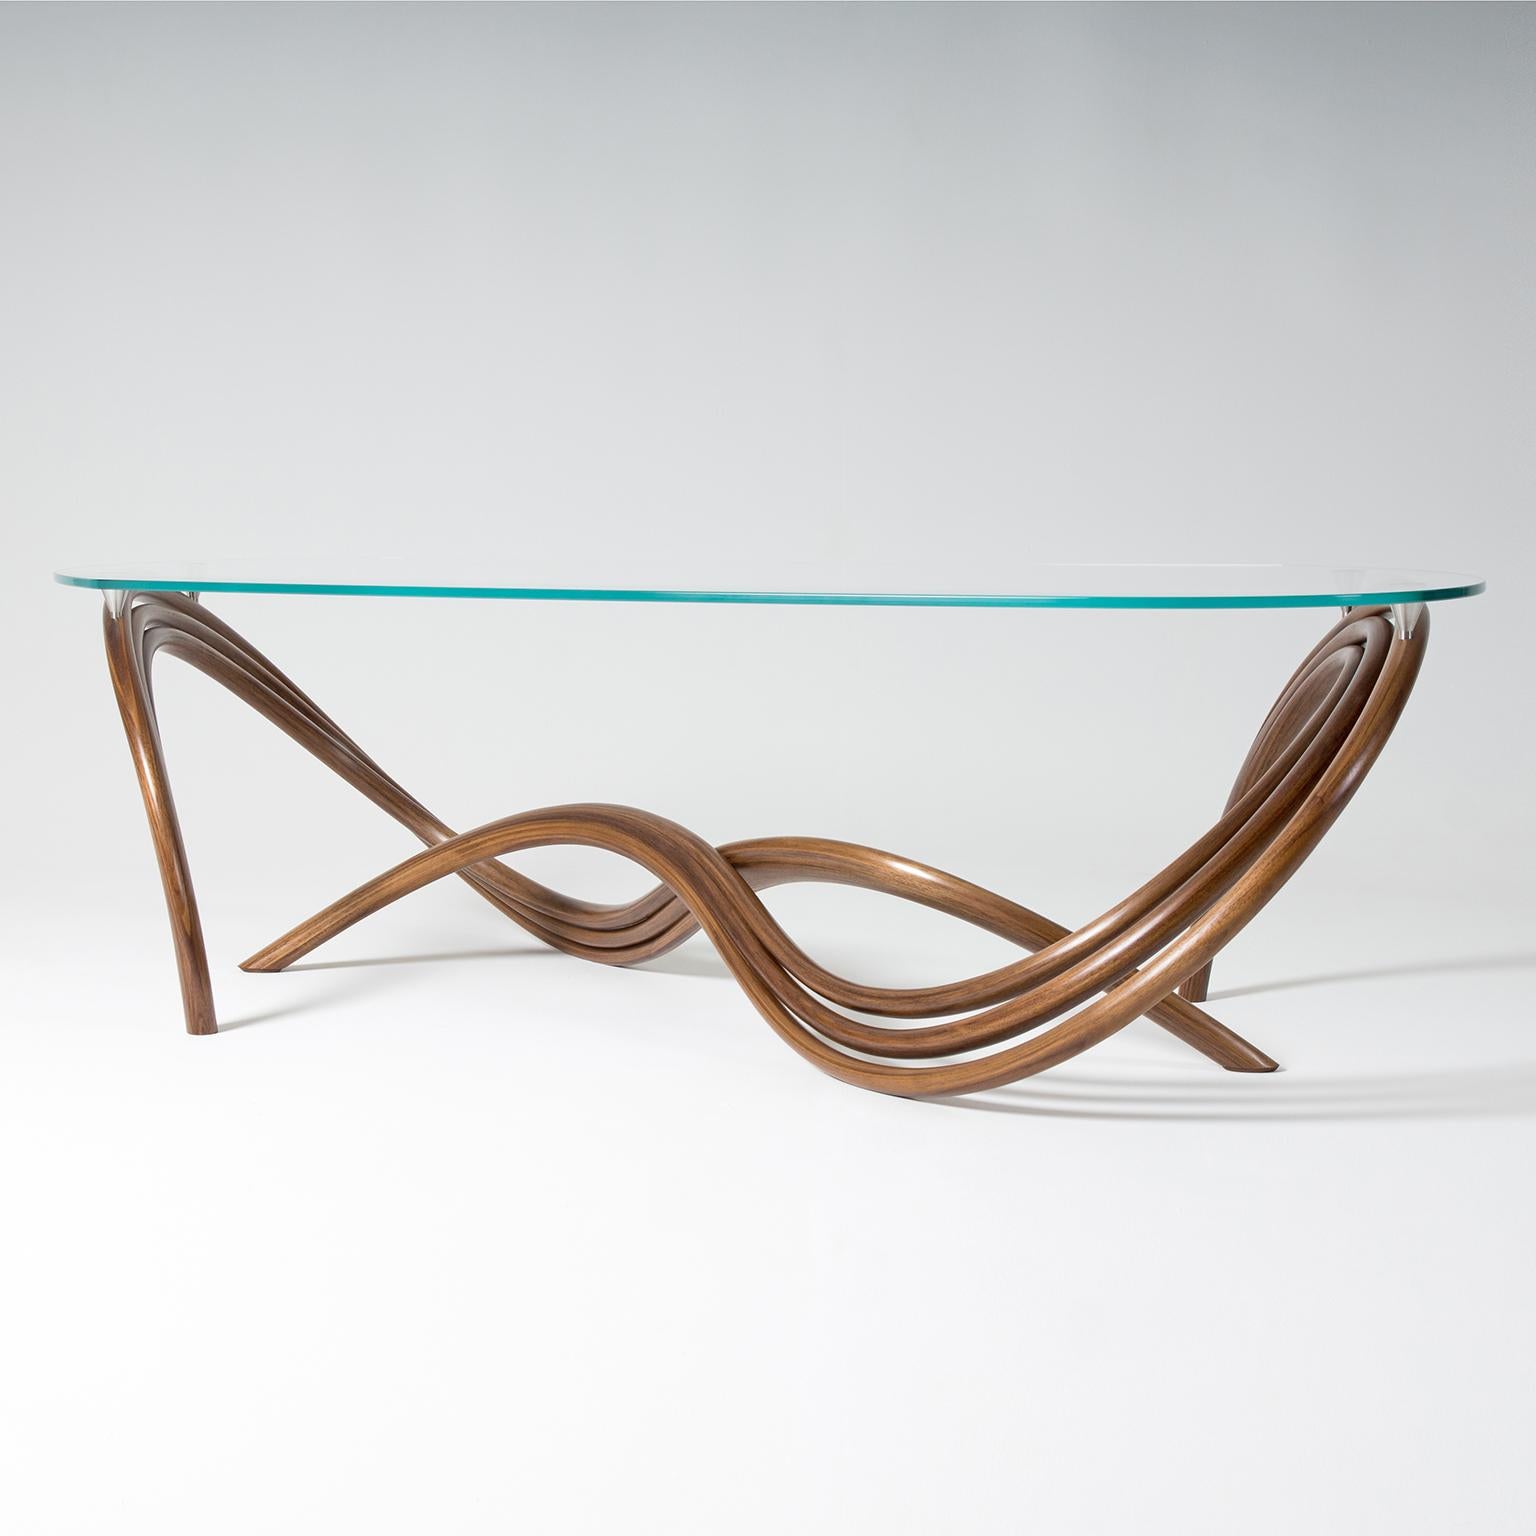 Contemporary Curved and Sculptural Coffee Table in Walnut and glass In New Condition For Sale In Bosham, GB